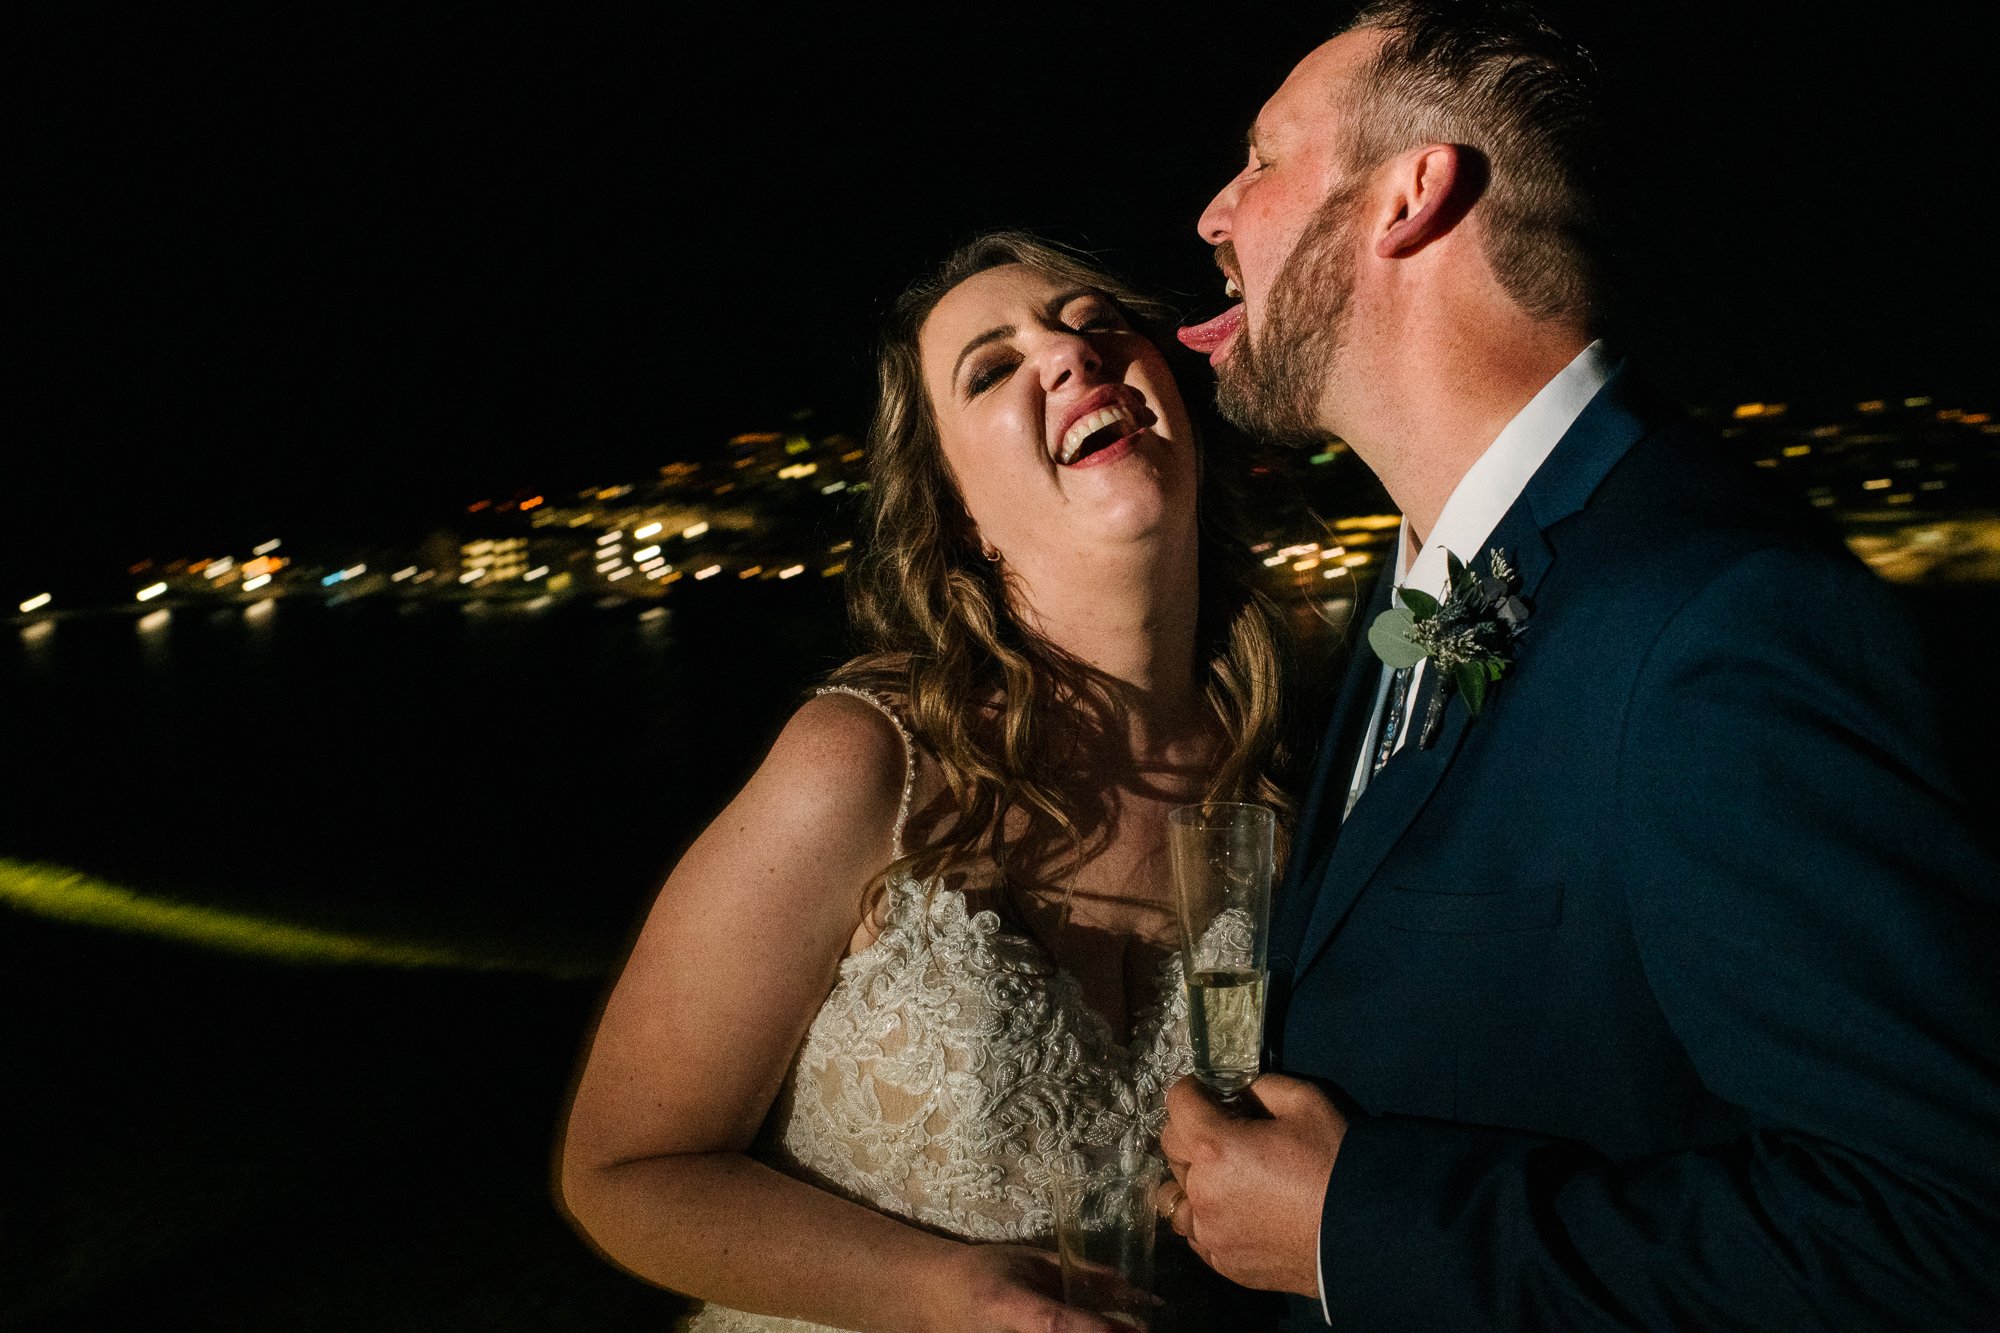 Groom licking her wife's face for a funny picture